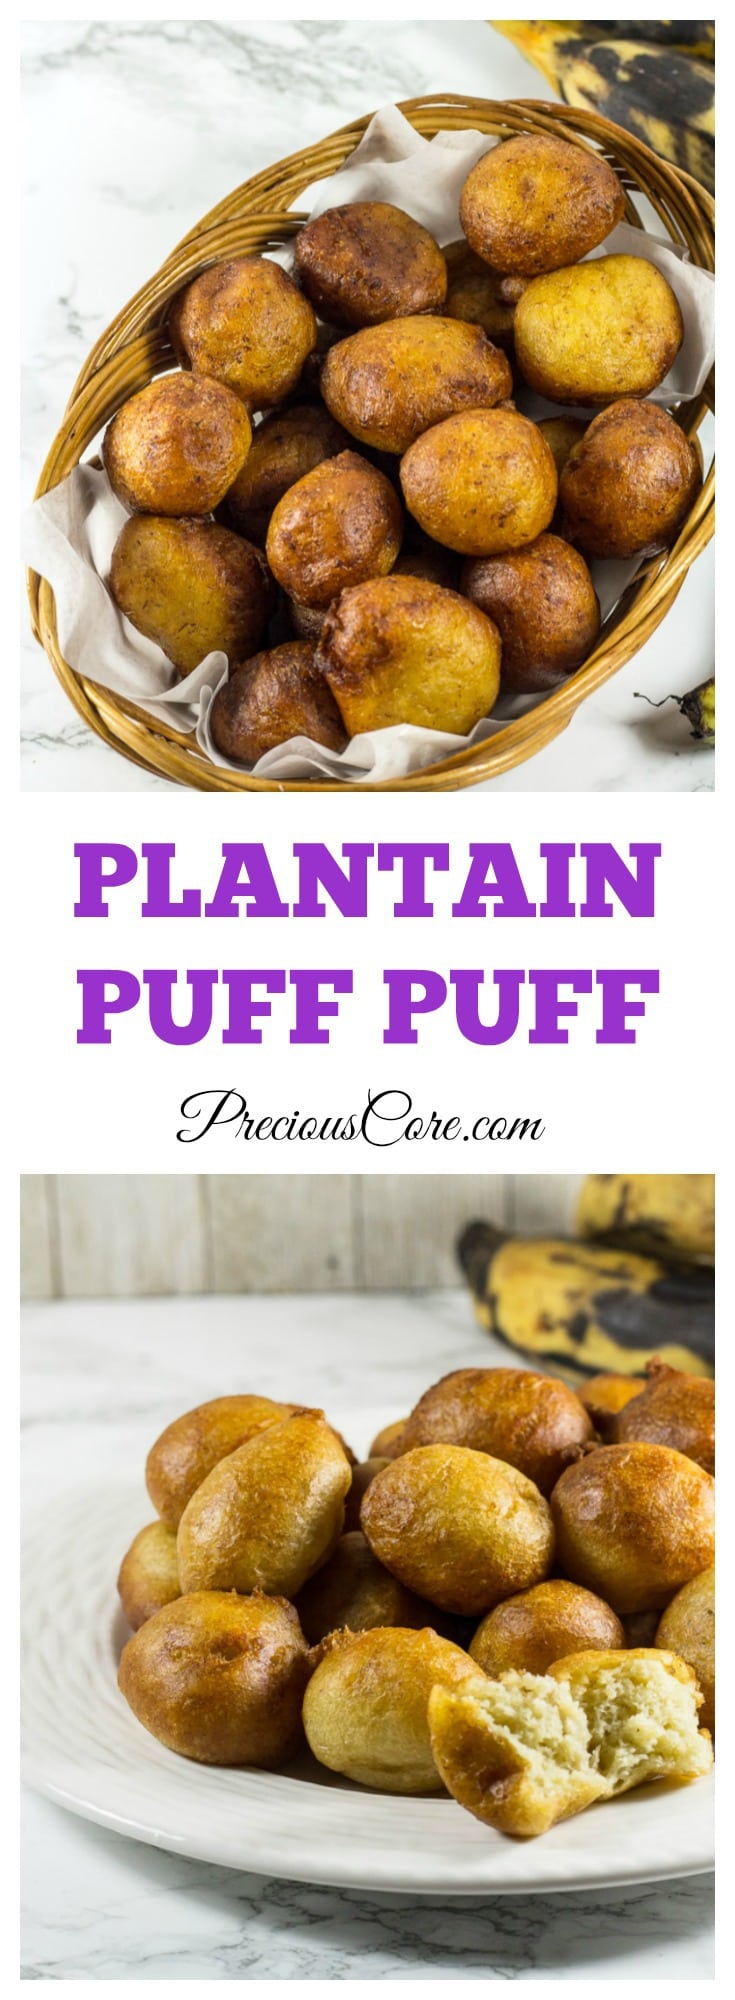 African puff puff made with plantains